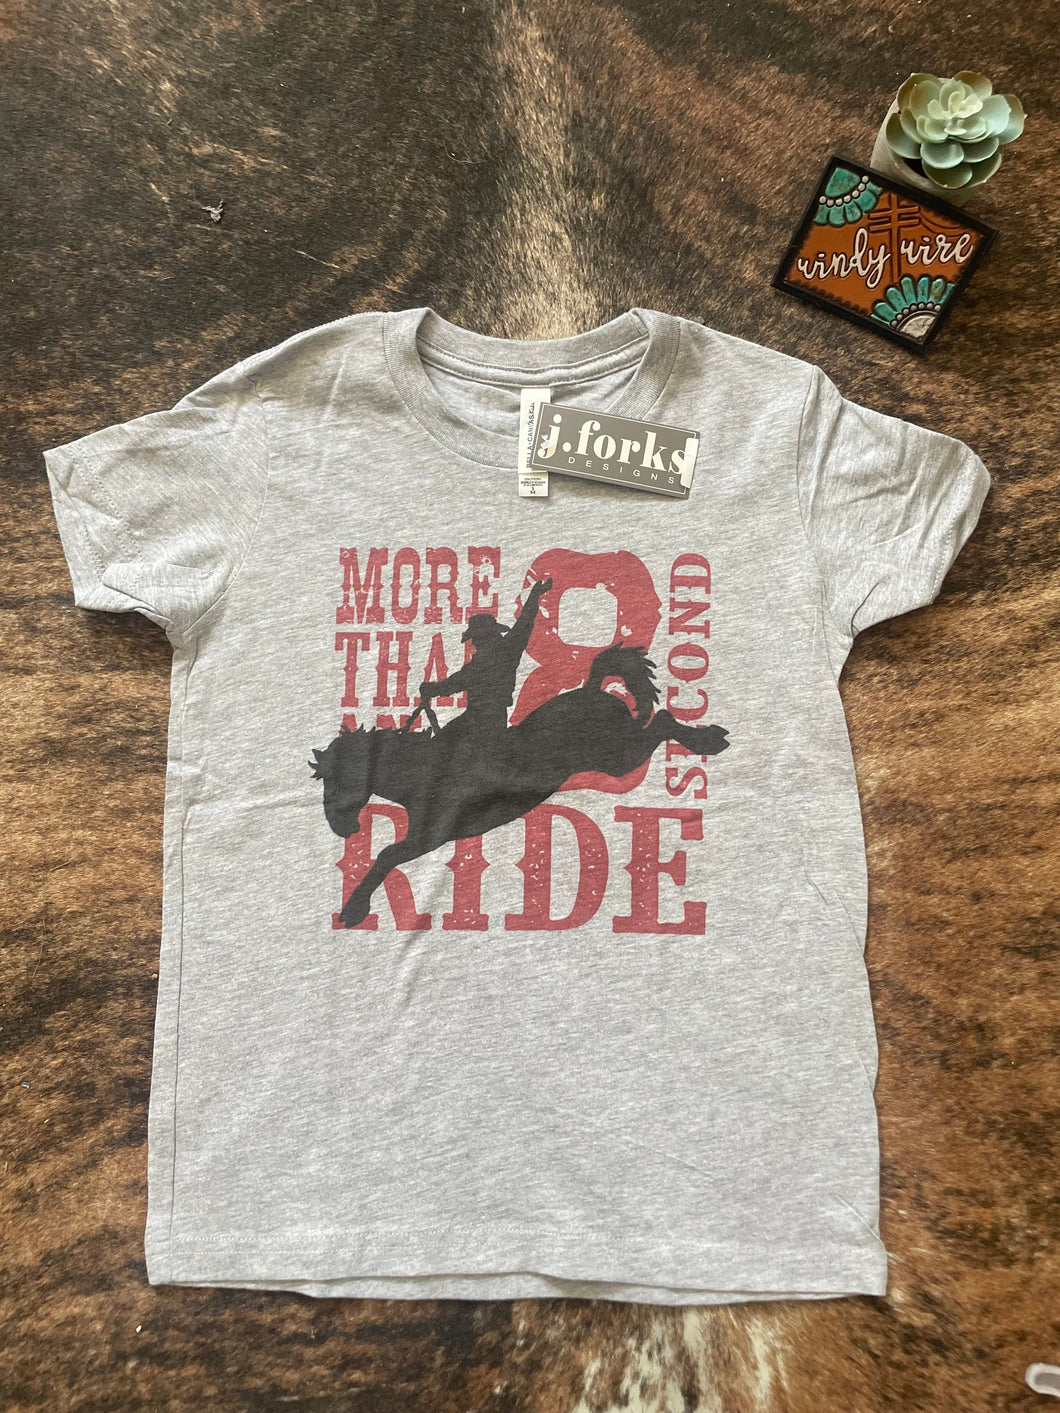 Toddler 8 Second Ride T-Shirt